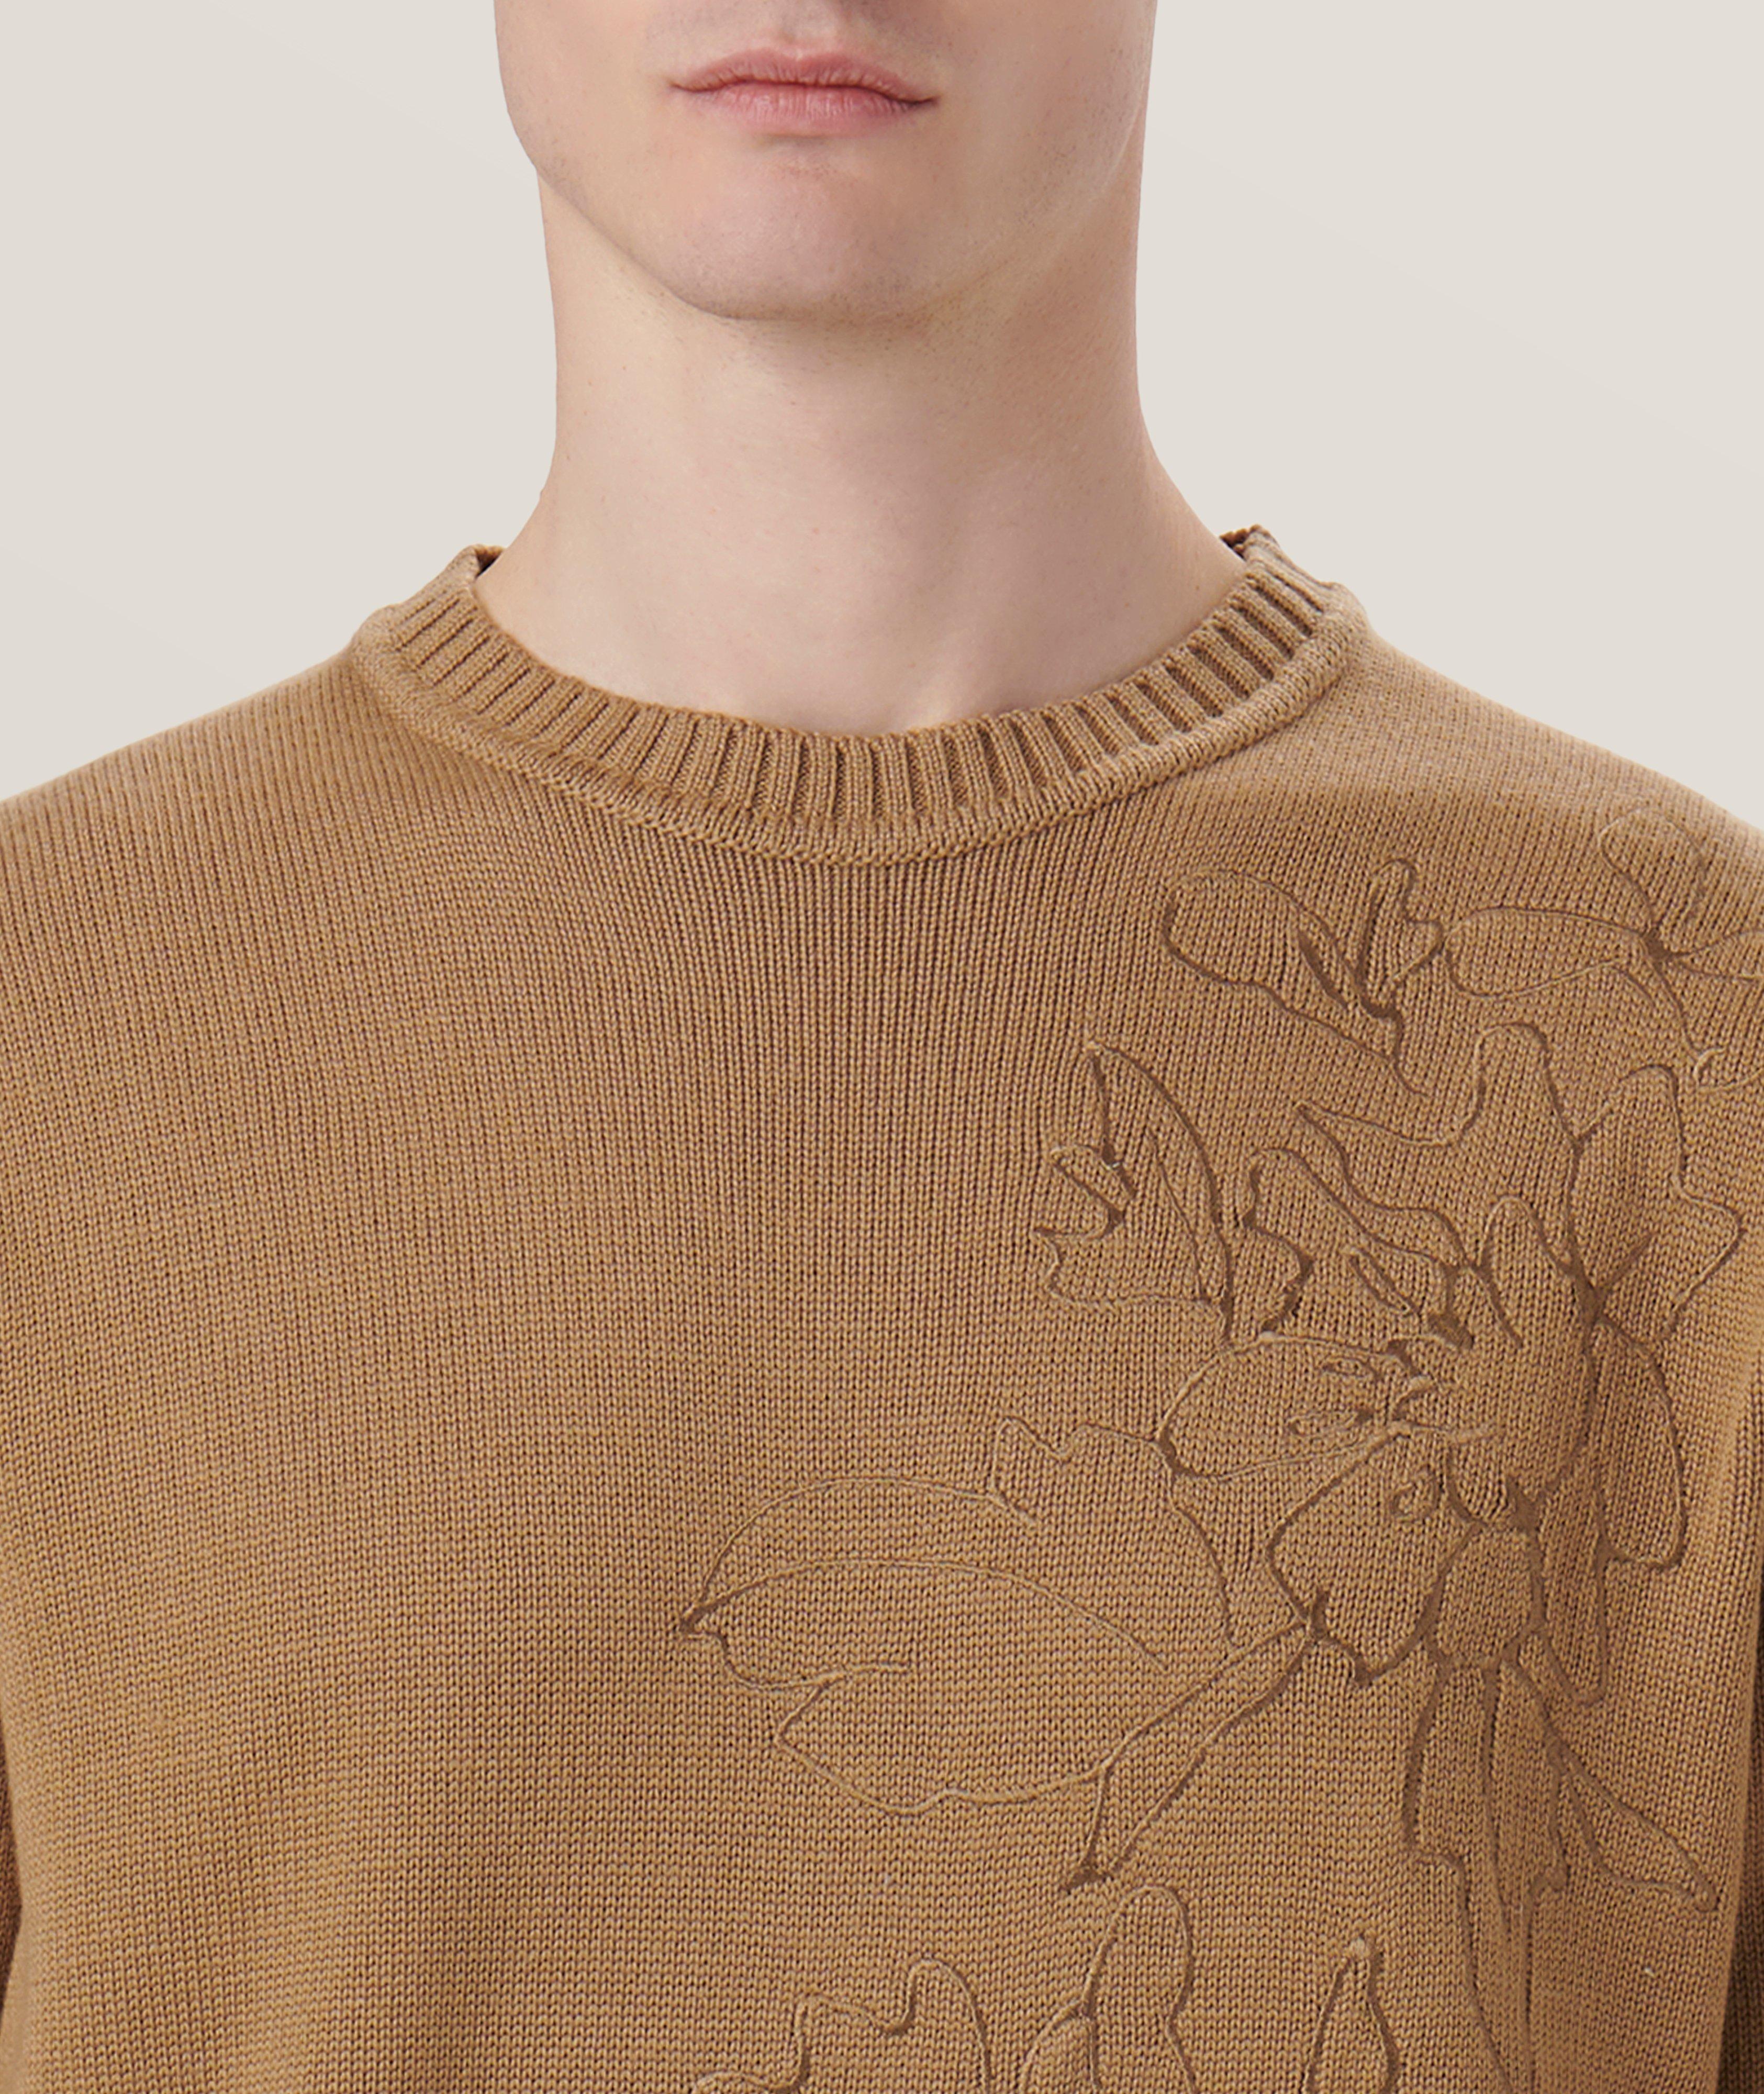 Floral Embroidered Merino Wool Sweater image 1